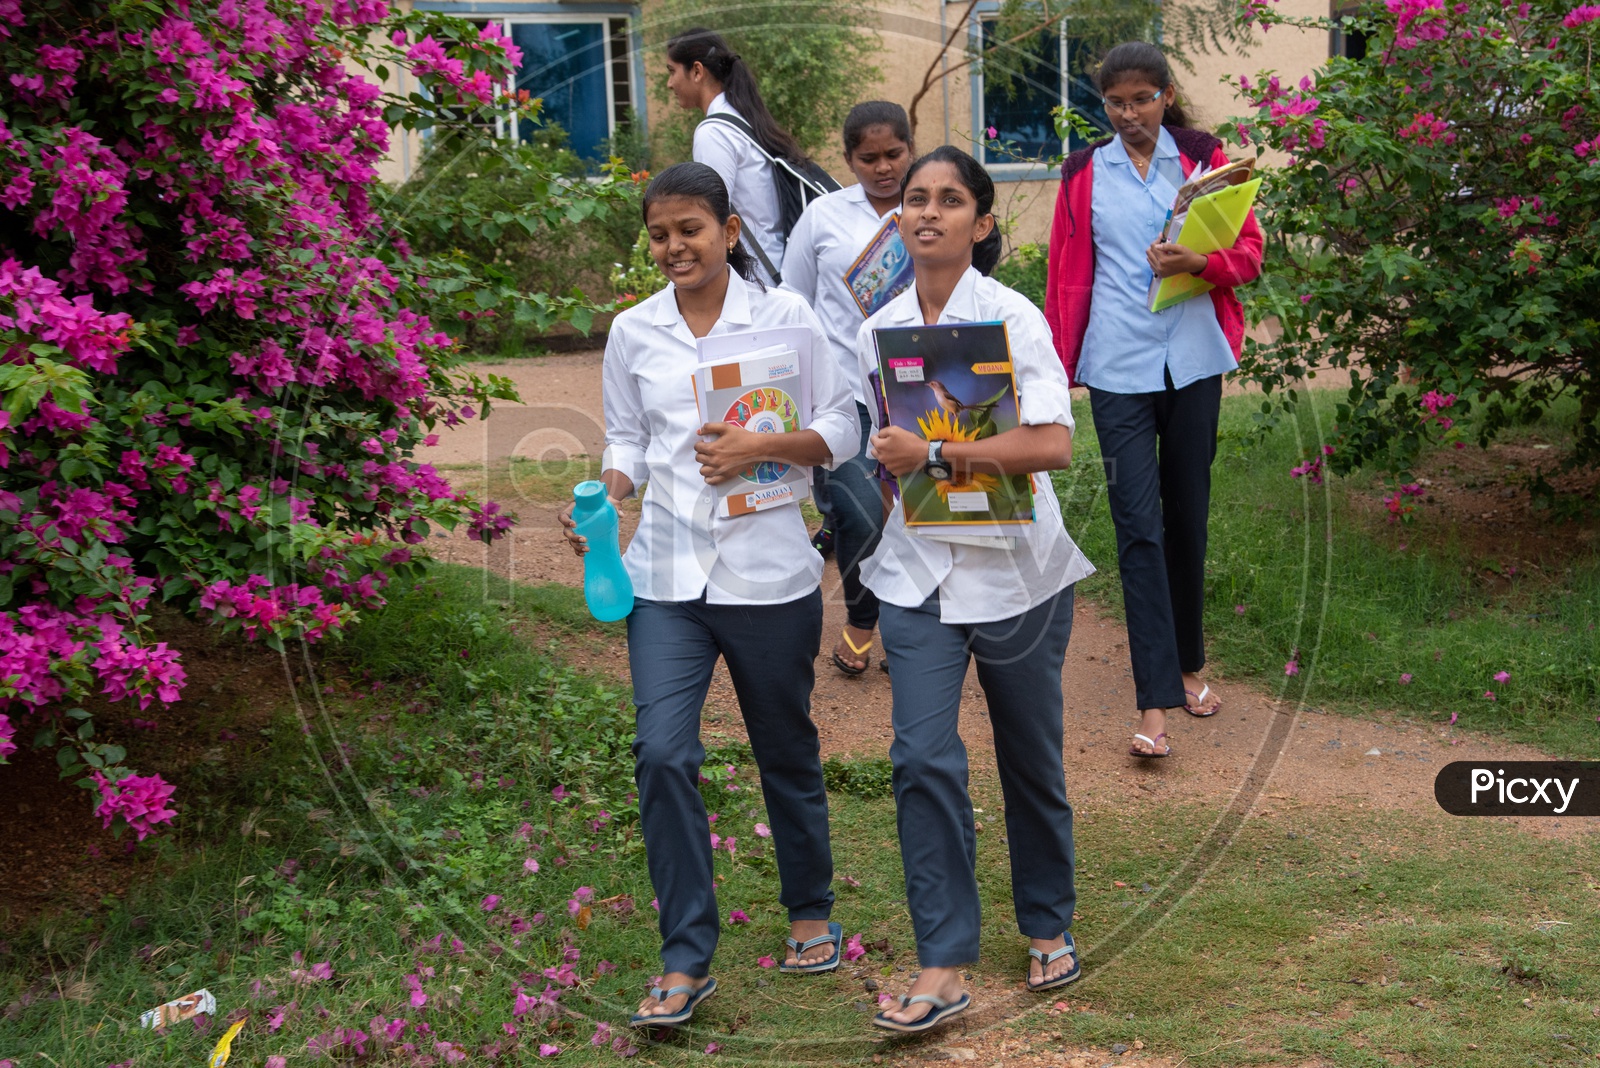 Students heading to examination hall at an Educational Institute in Hyderabad